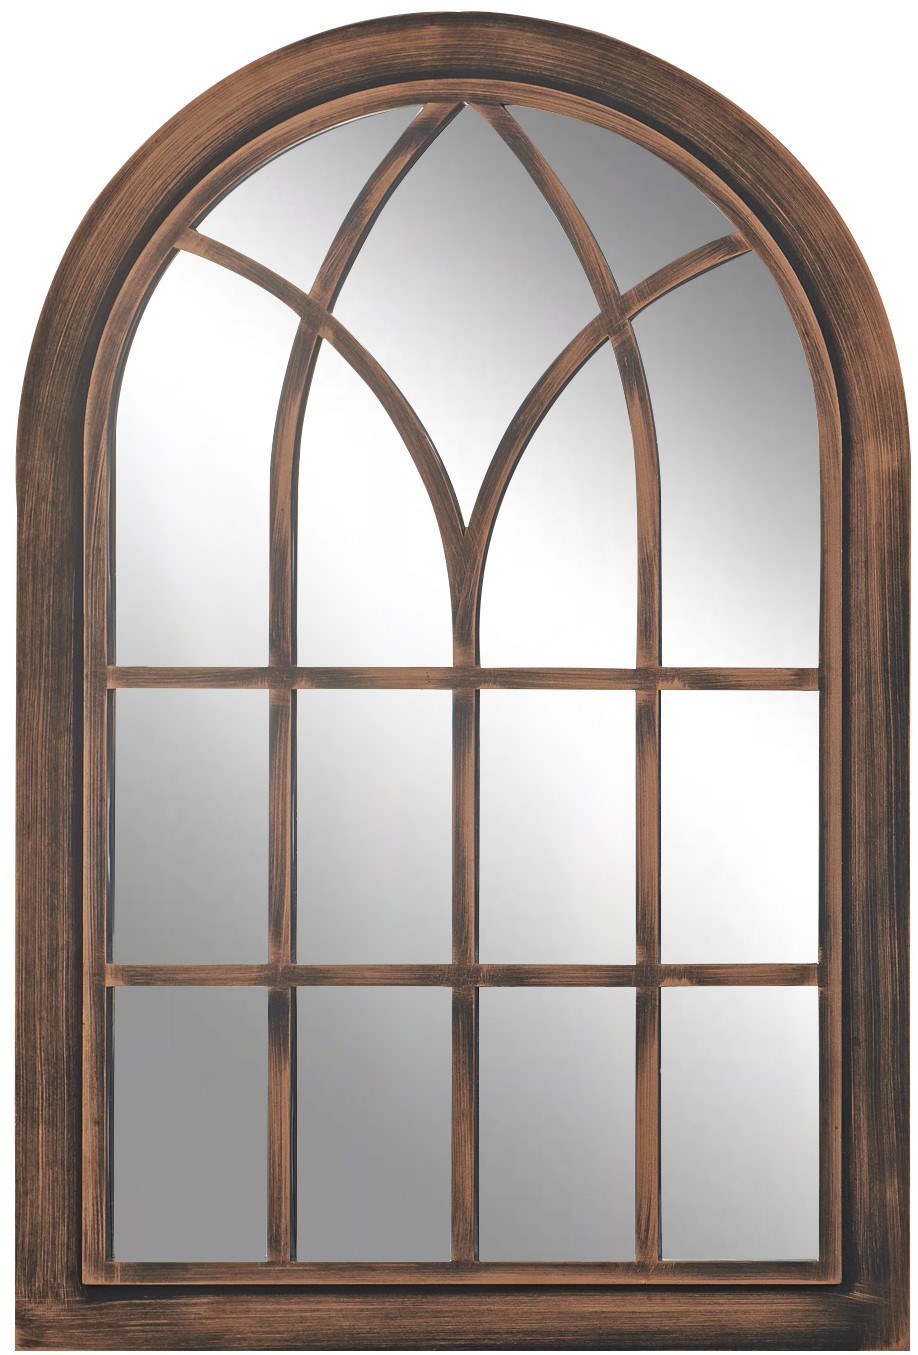 Toscana Wall Mirror - Brushed Copper